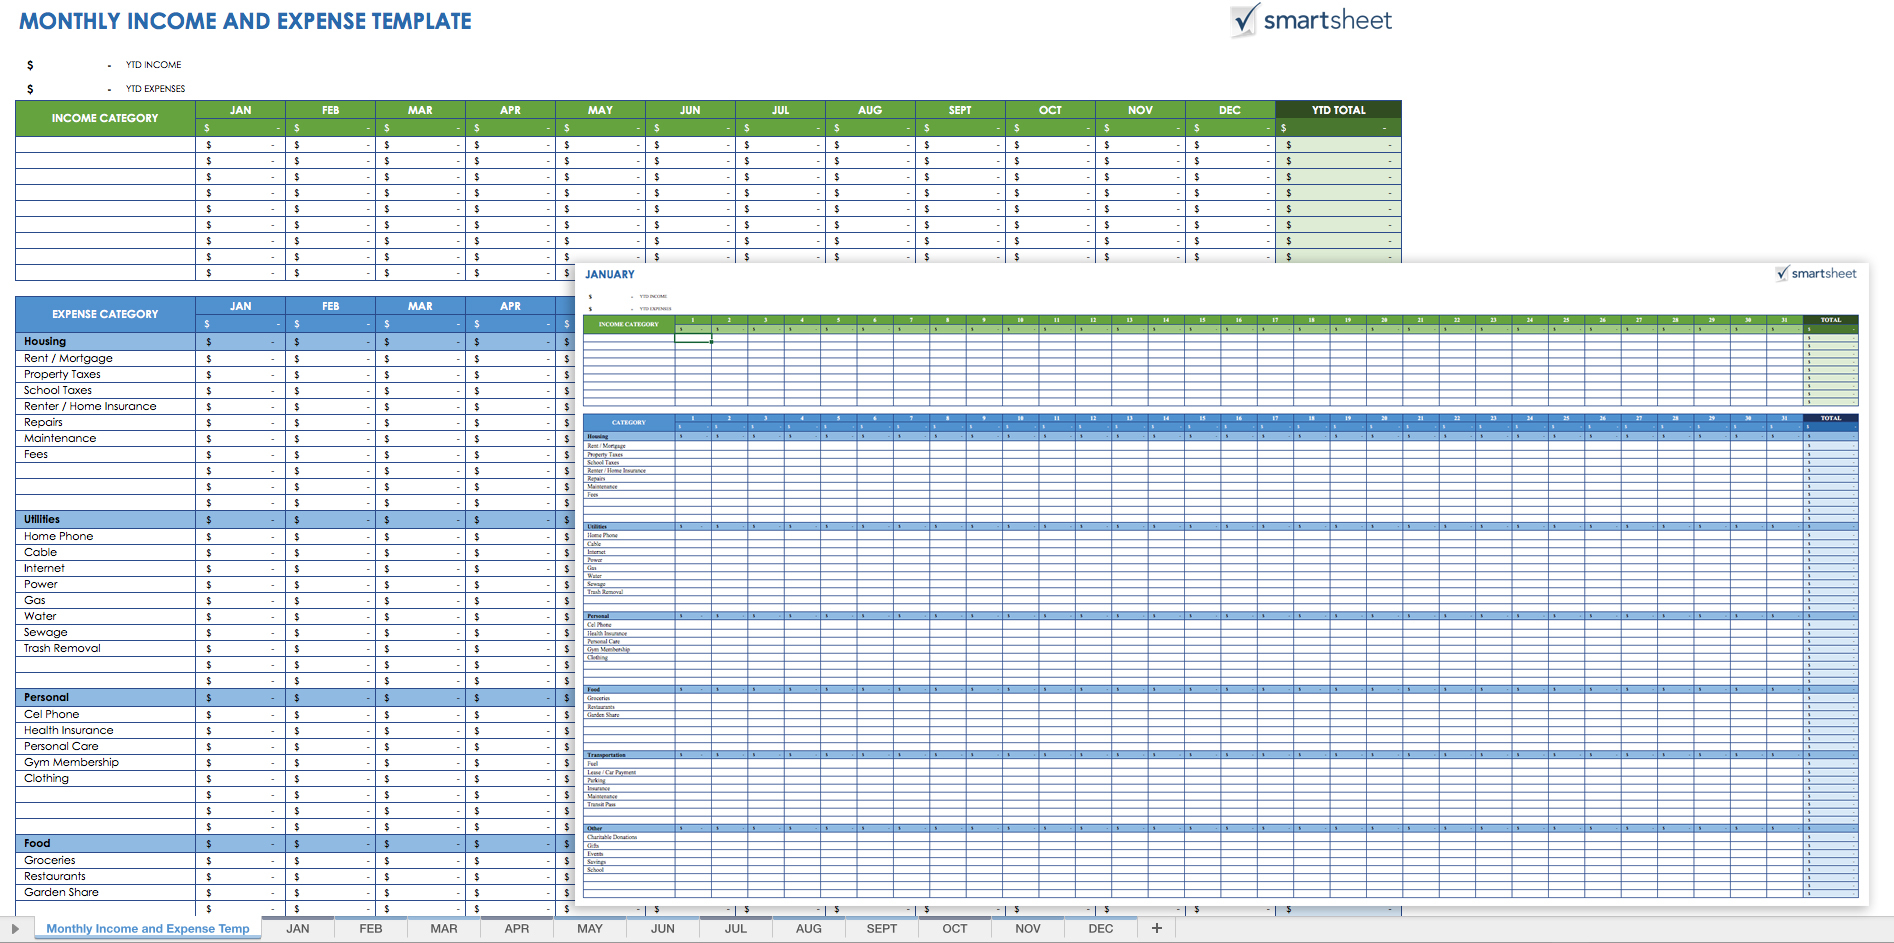 Free Expense Report Templates Smartsheet In Excel Spreadsheet For Business Expenses